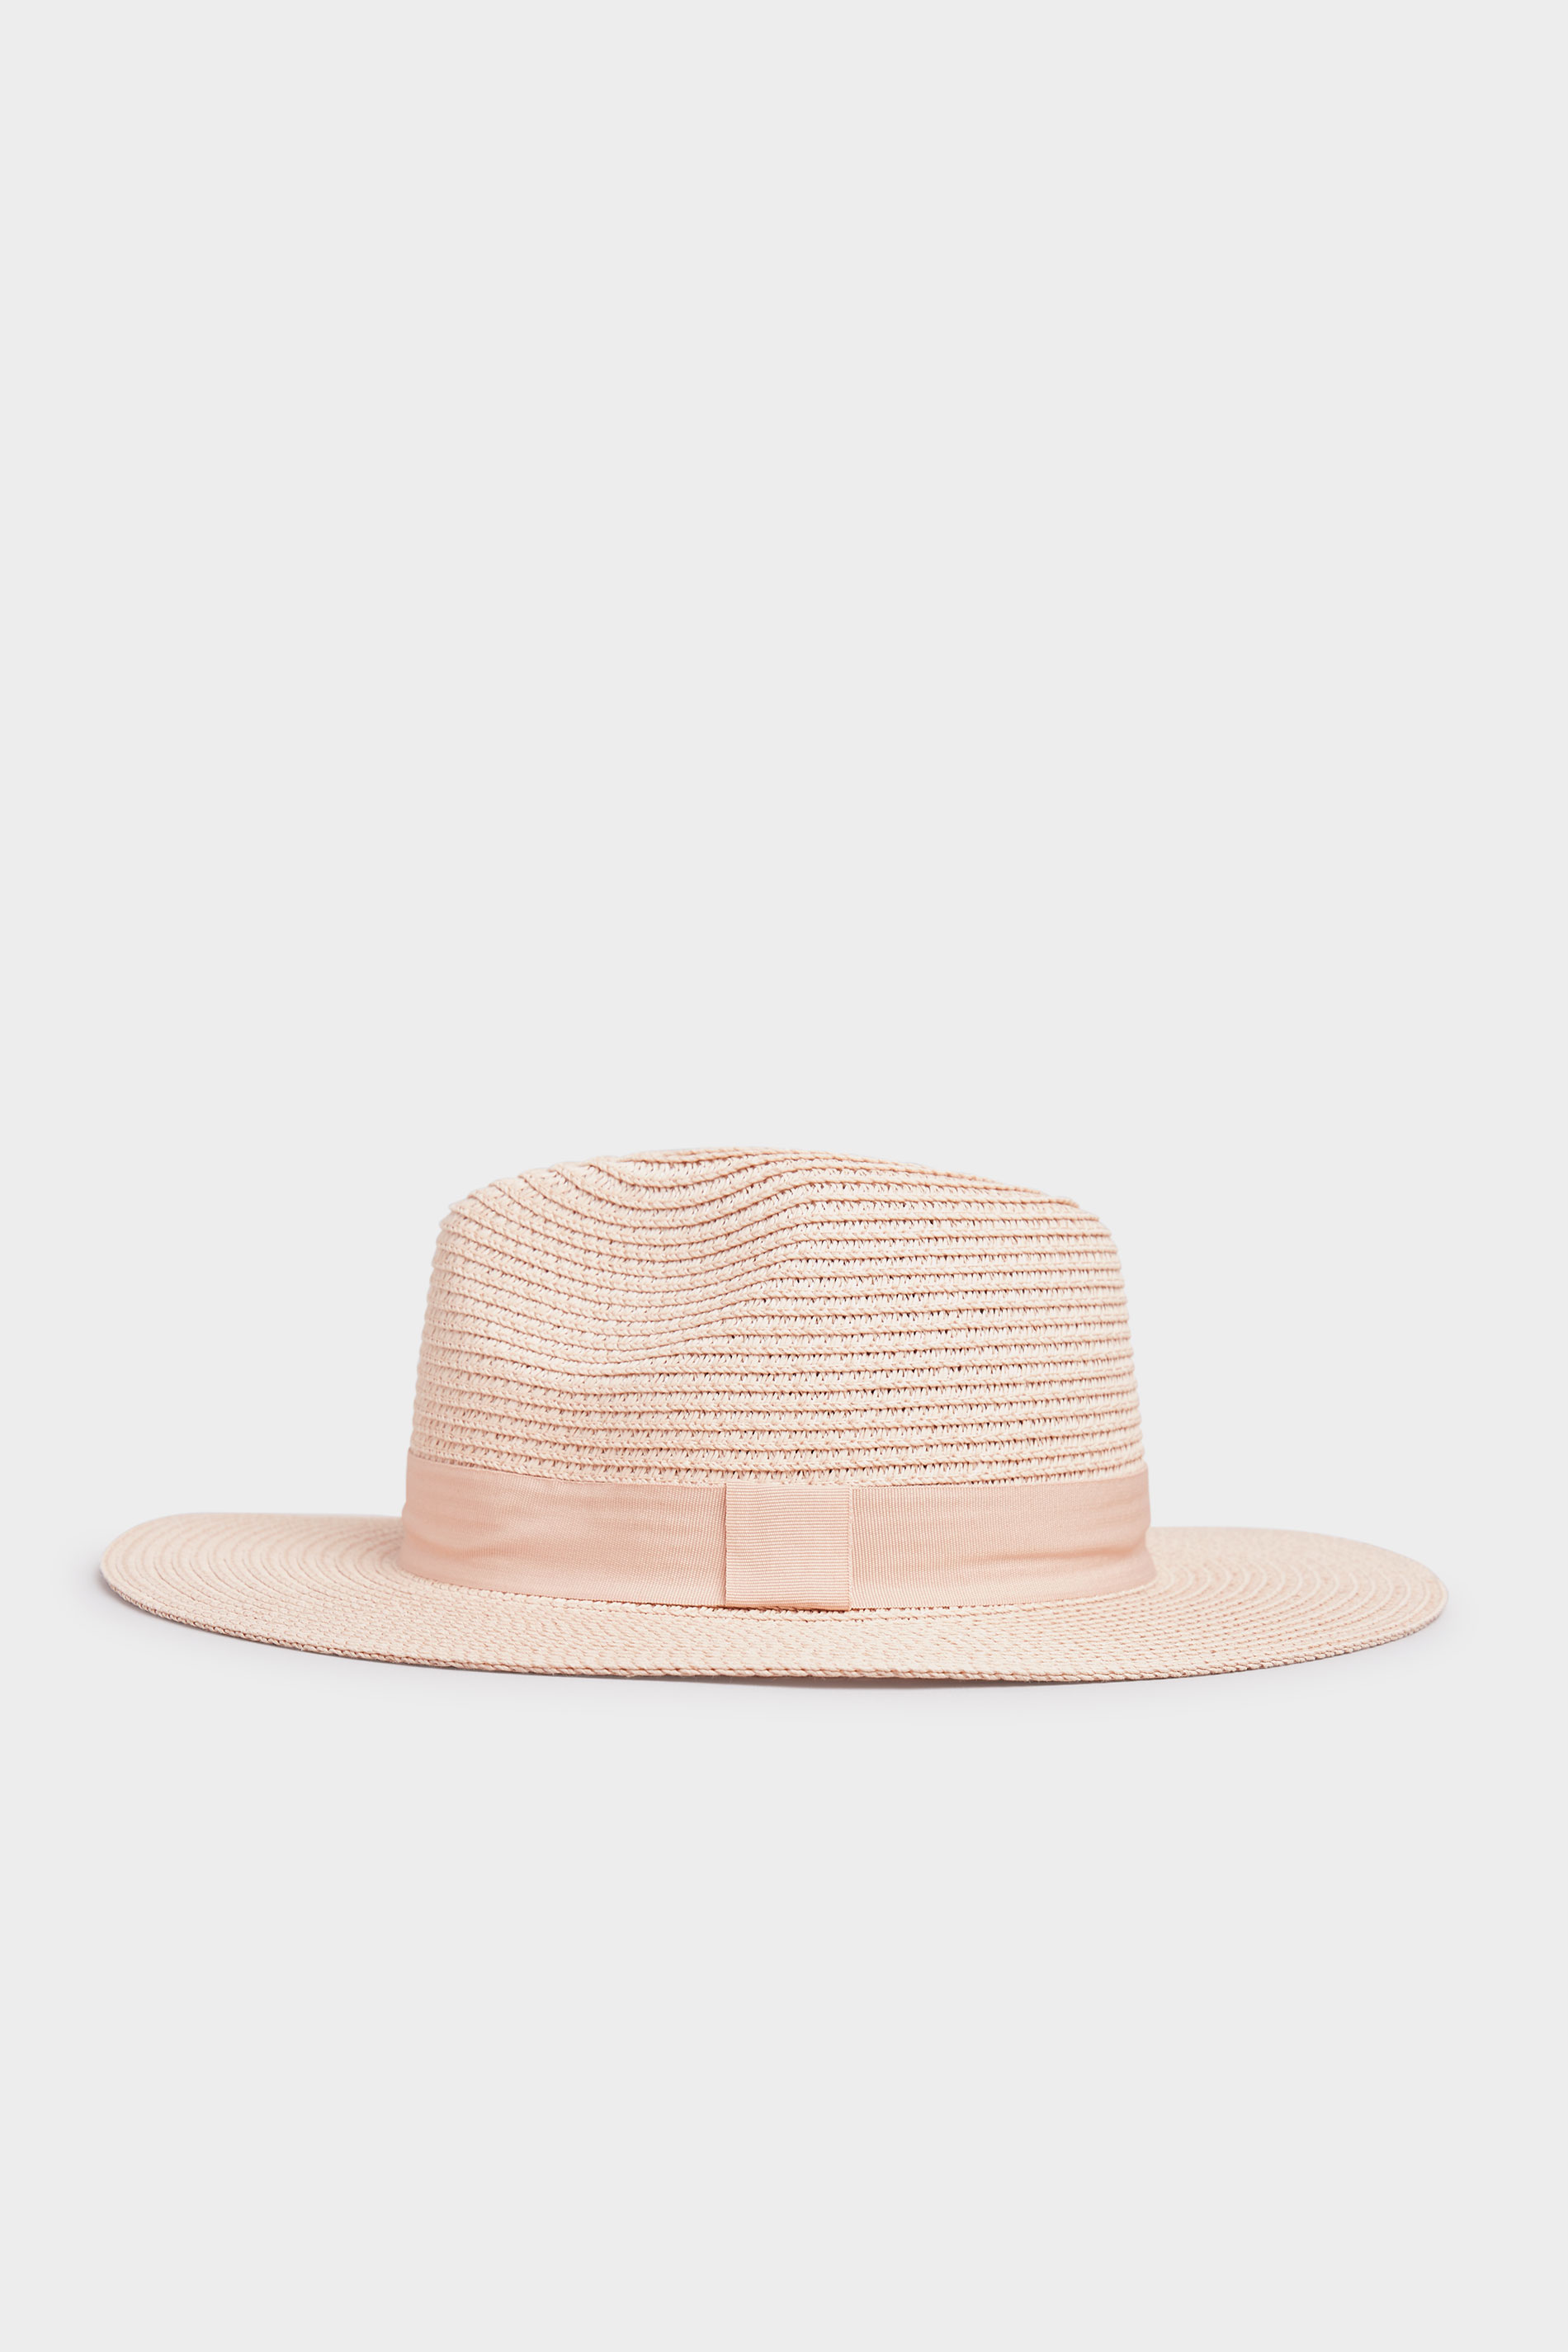 Plus Size Pink Straw Fedora Hat | Long Tall Sally